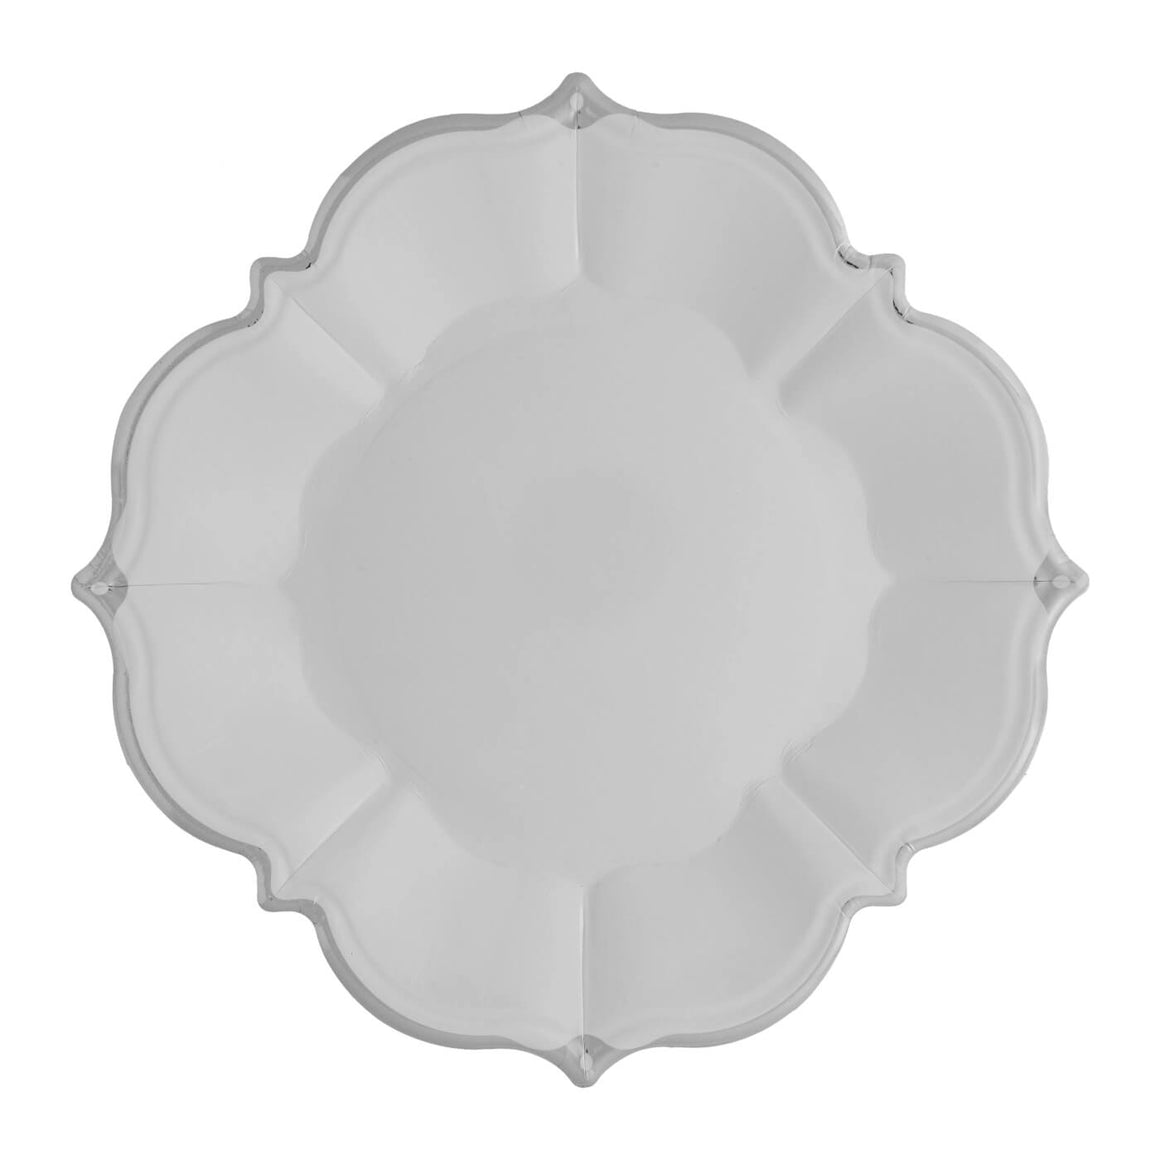 PLATES LARGE - GREY LUNCHEON SCALLOPED